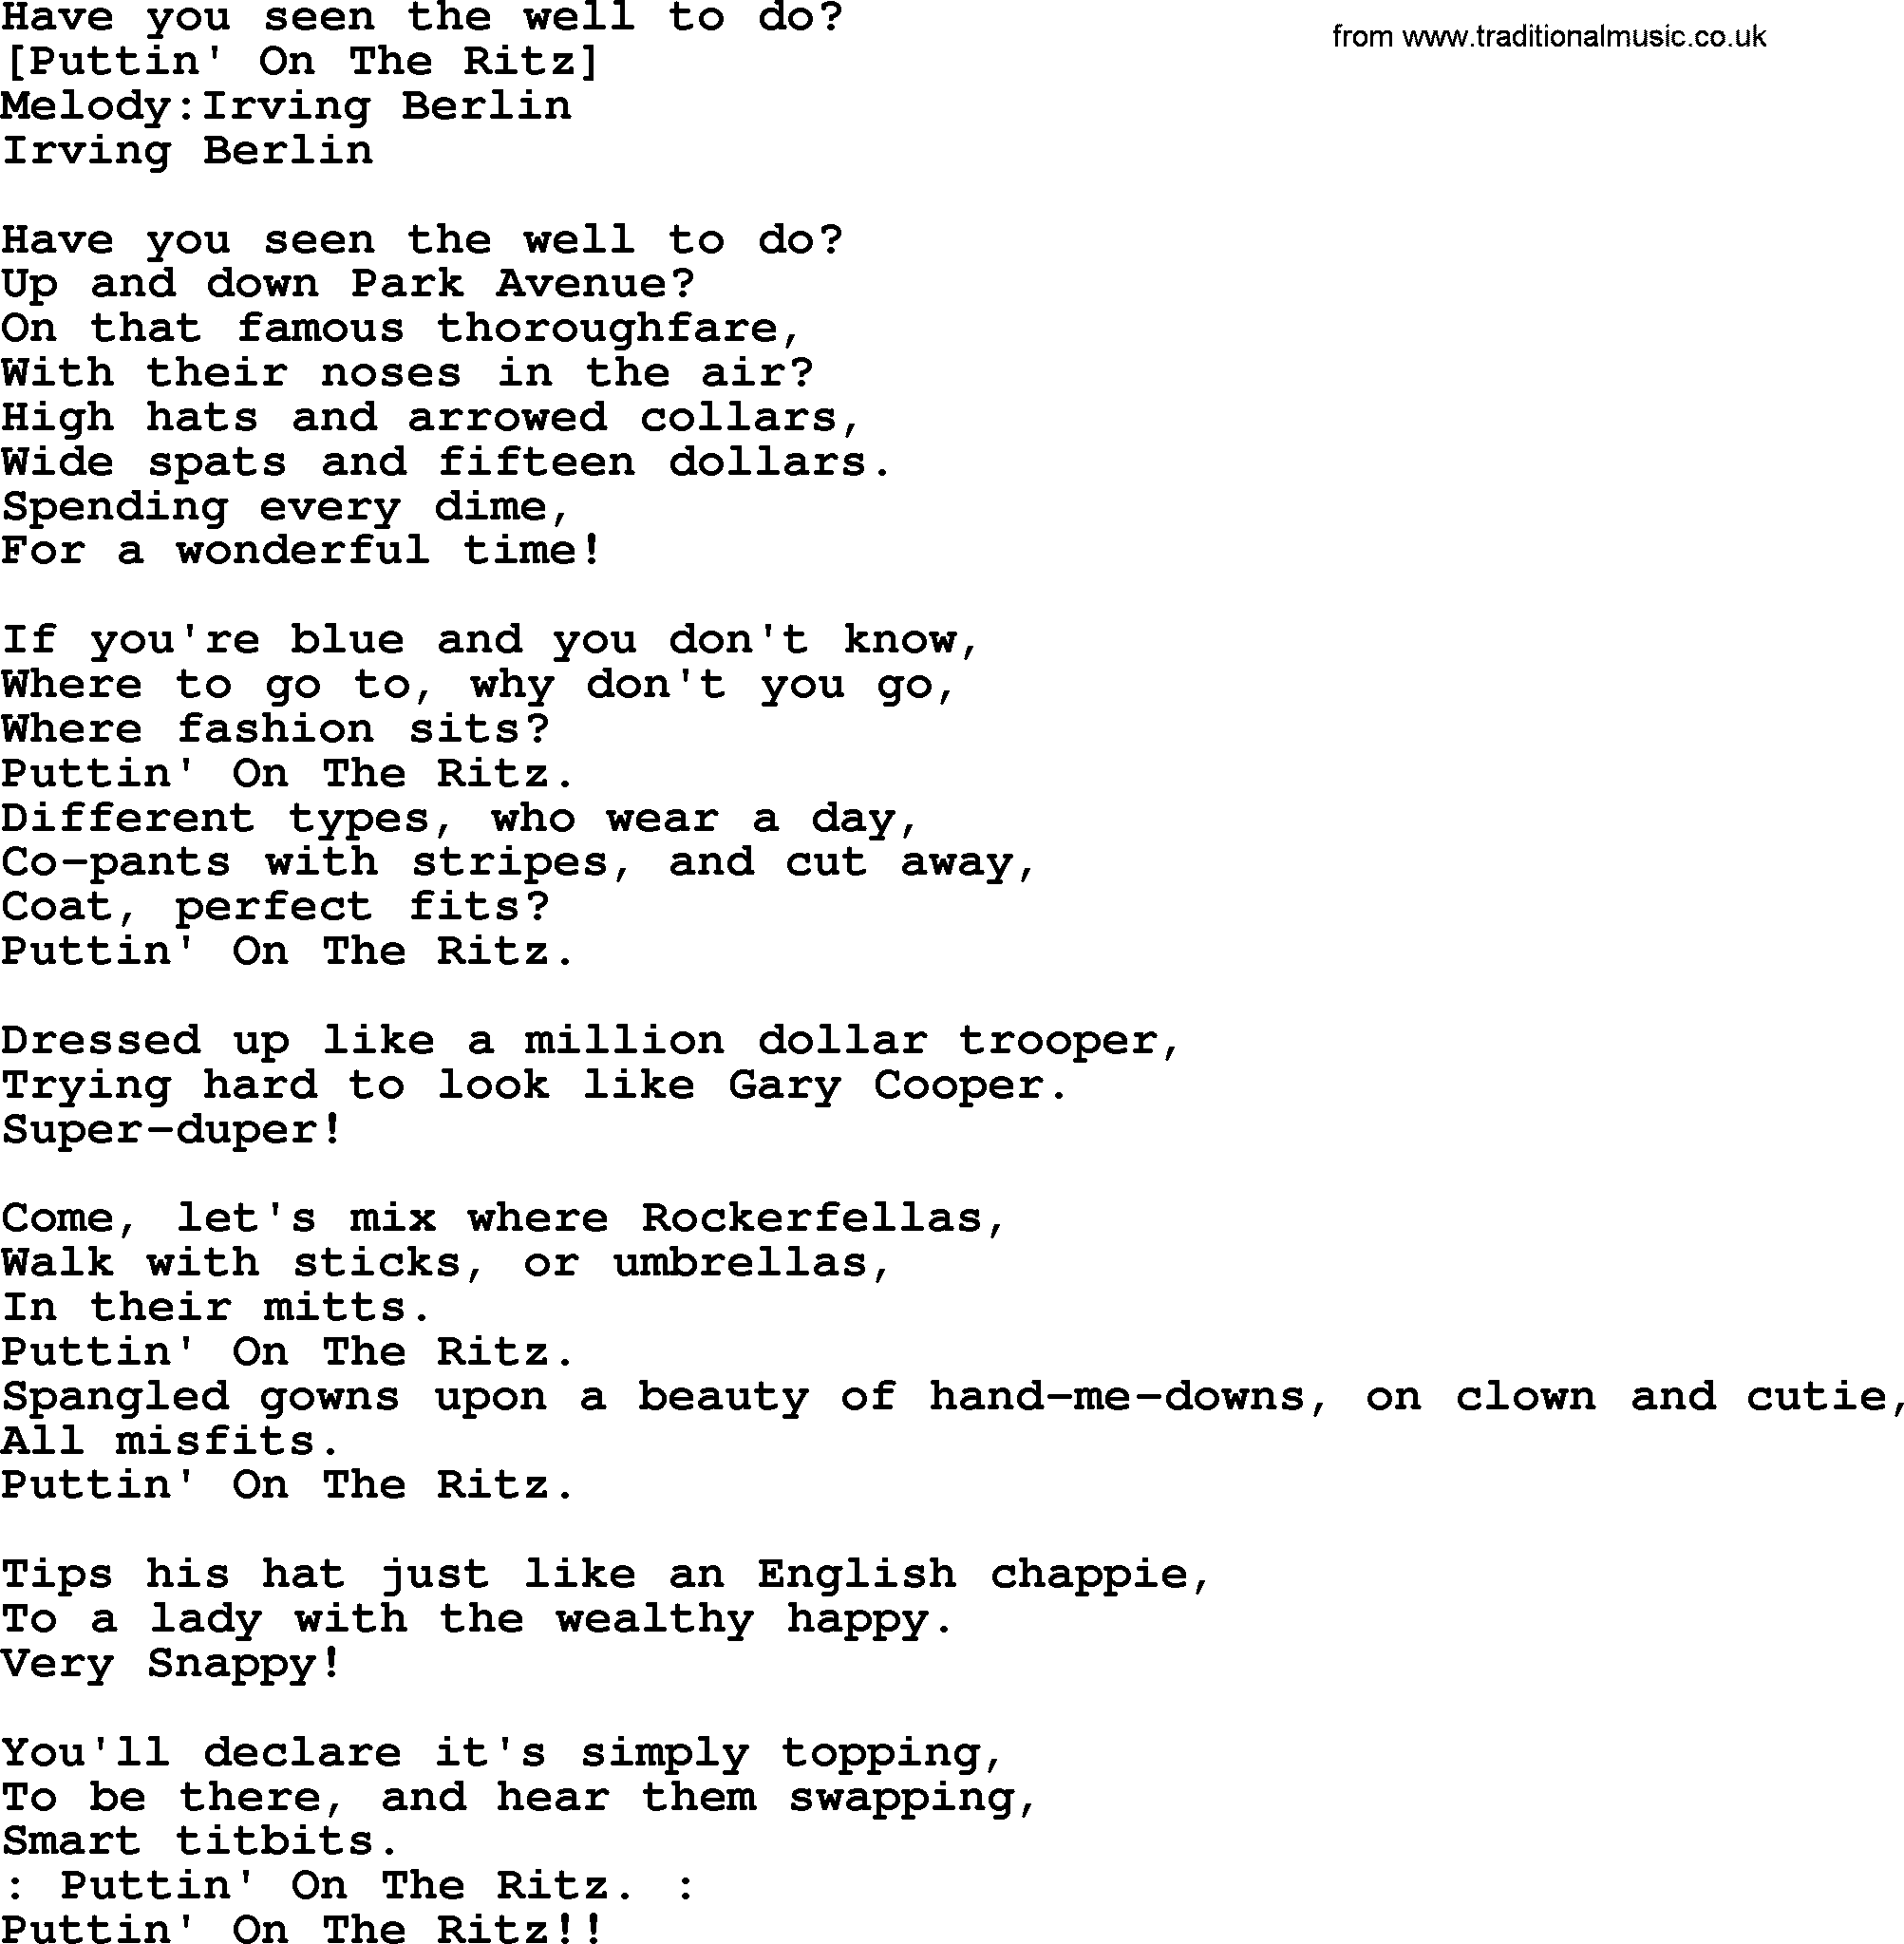 Old American Song: Have You Seen The Well To Do, lyrics